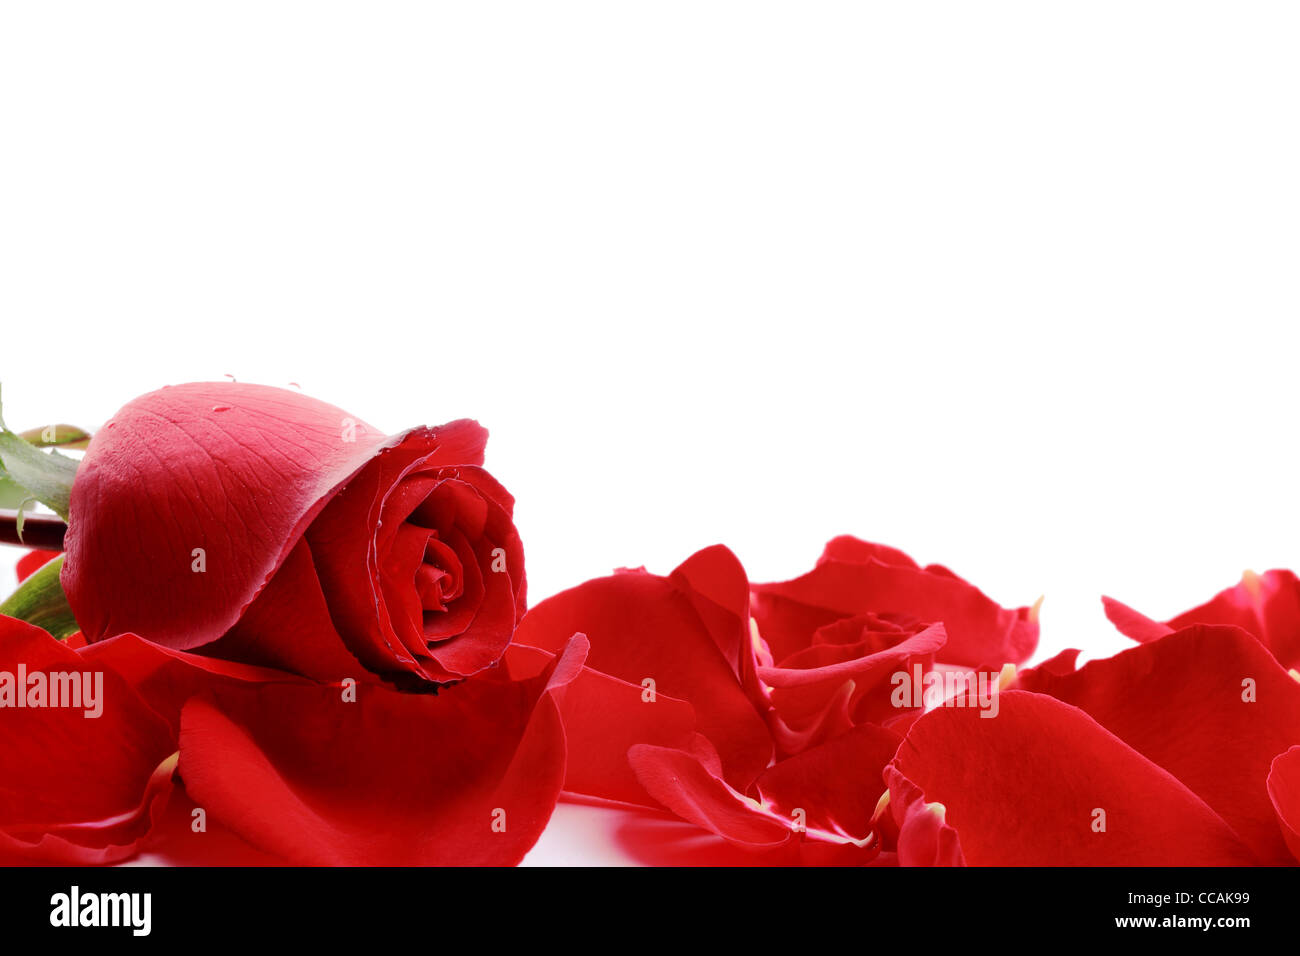 Red Rose petals isolated on white Banque D'Images